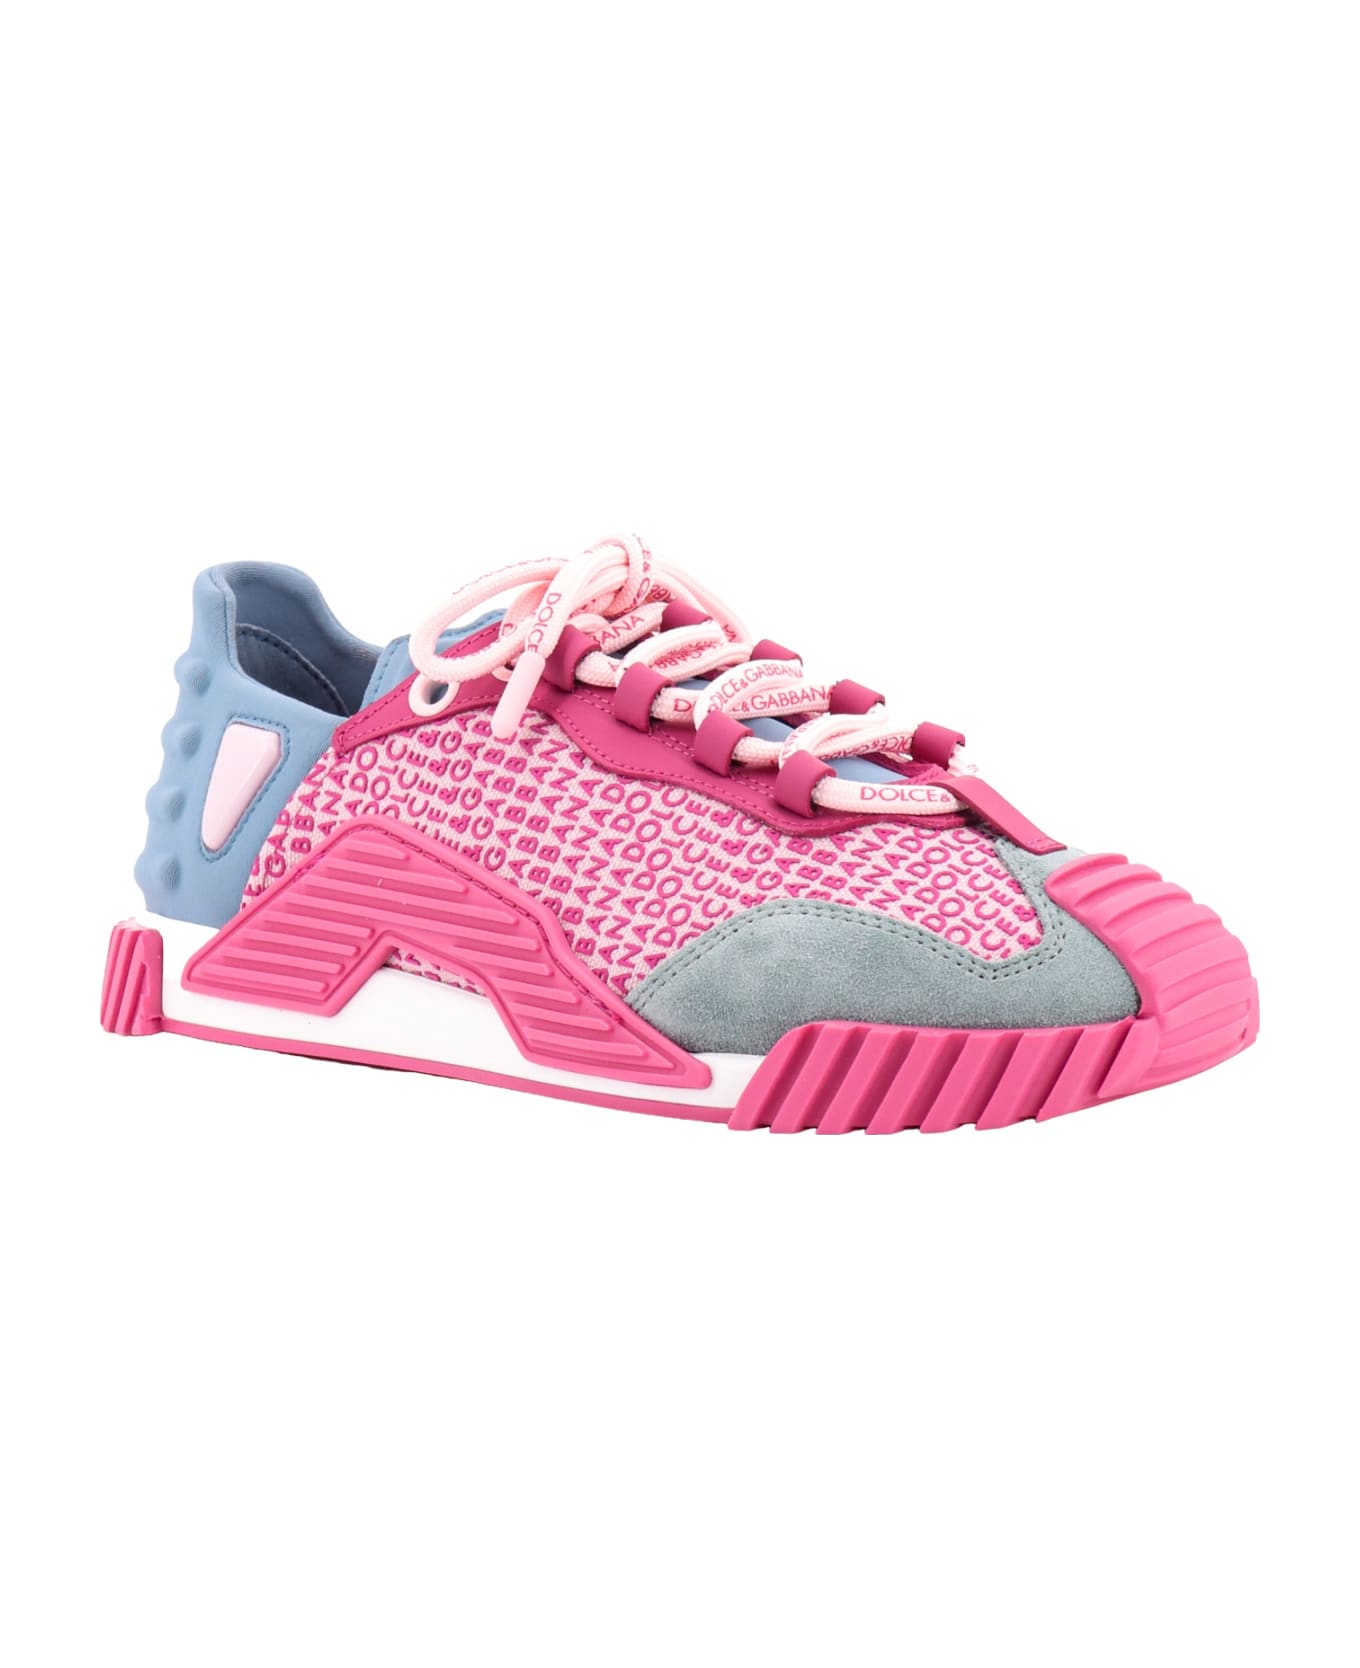 Dolce & Gabbana Ns1 Sneakers - Pink